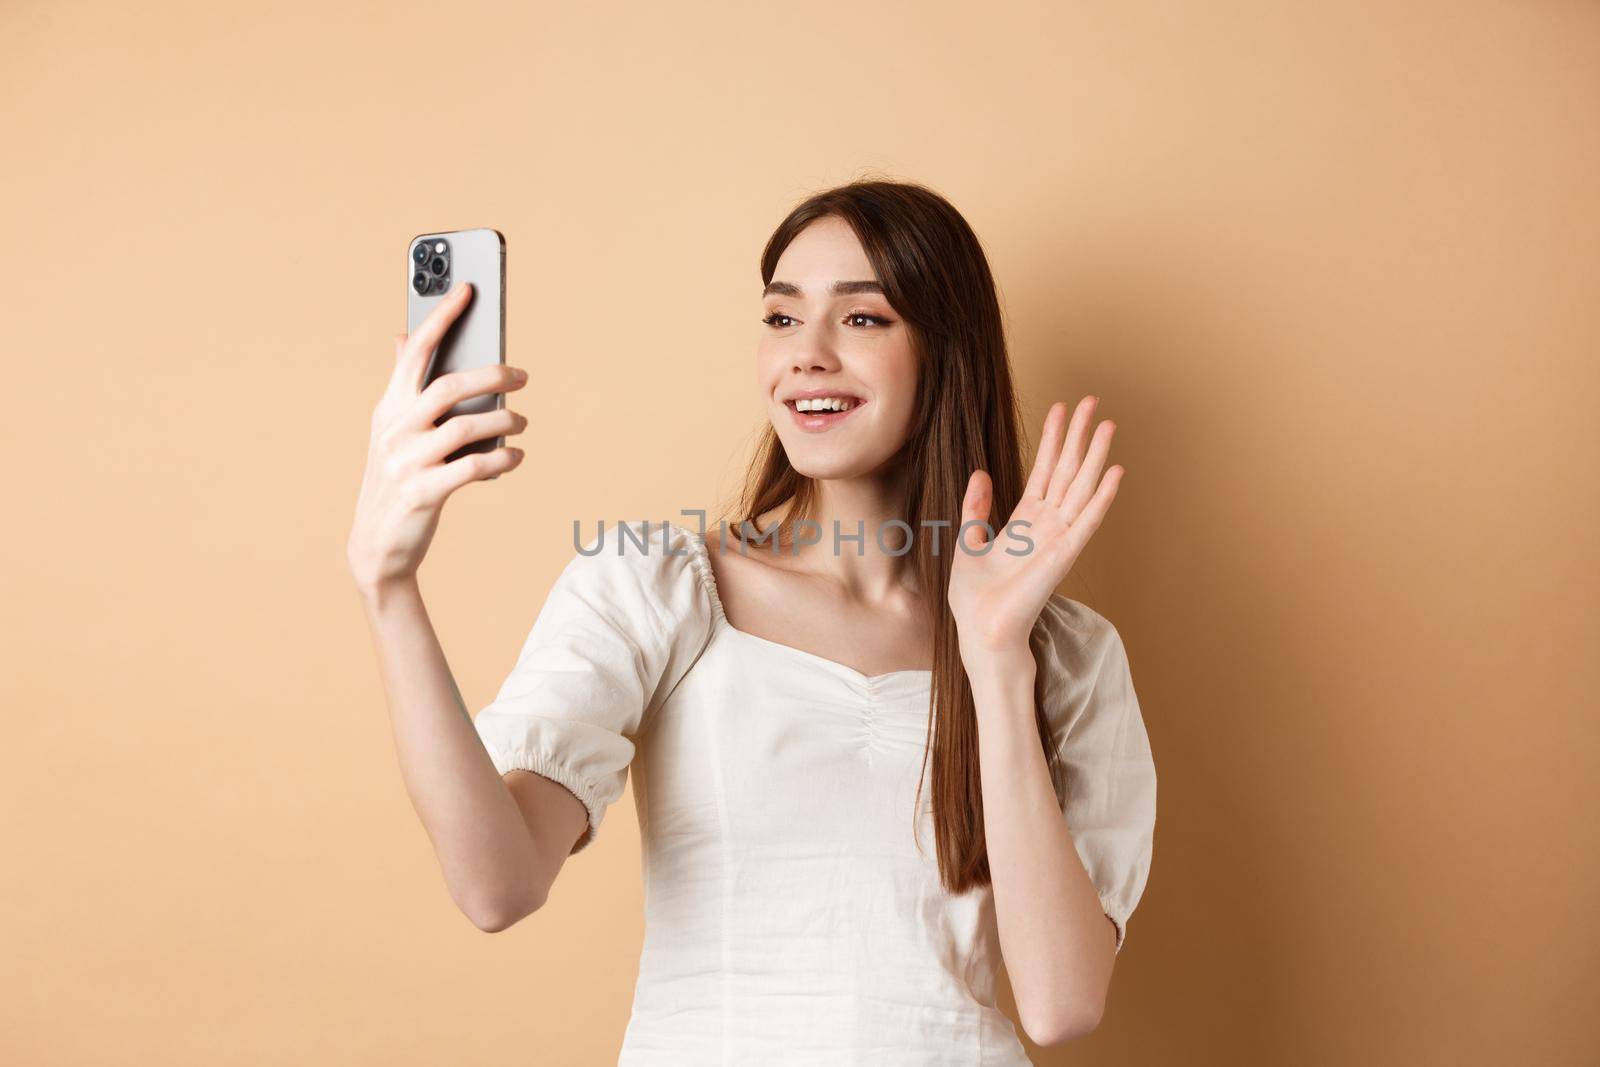 Girl video chat on phone, waiving hand at mobile camera and saying hello, talking to friend, smiling and standing on beige background.